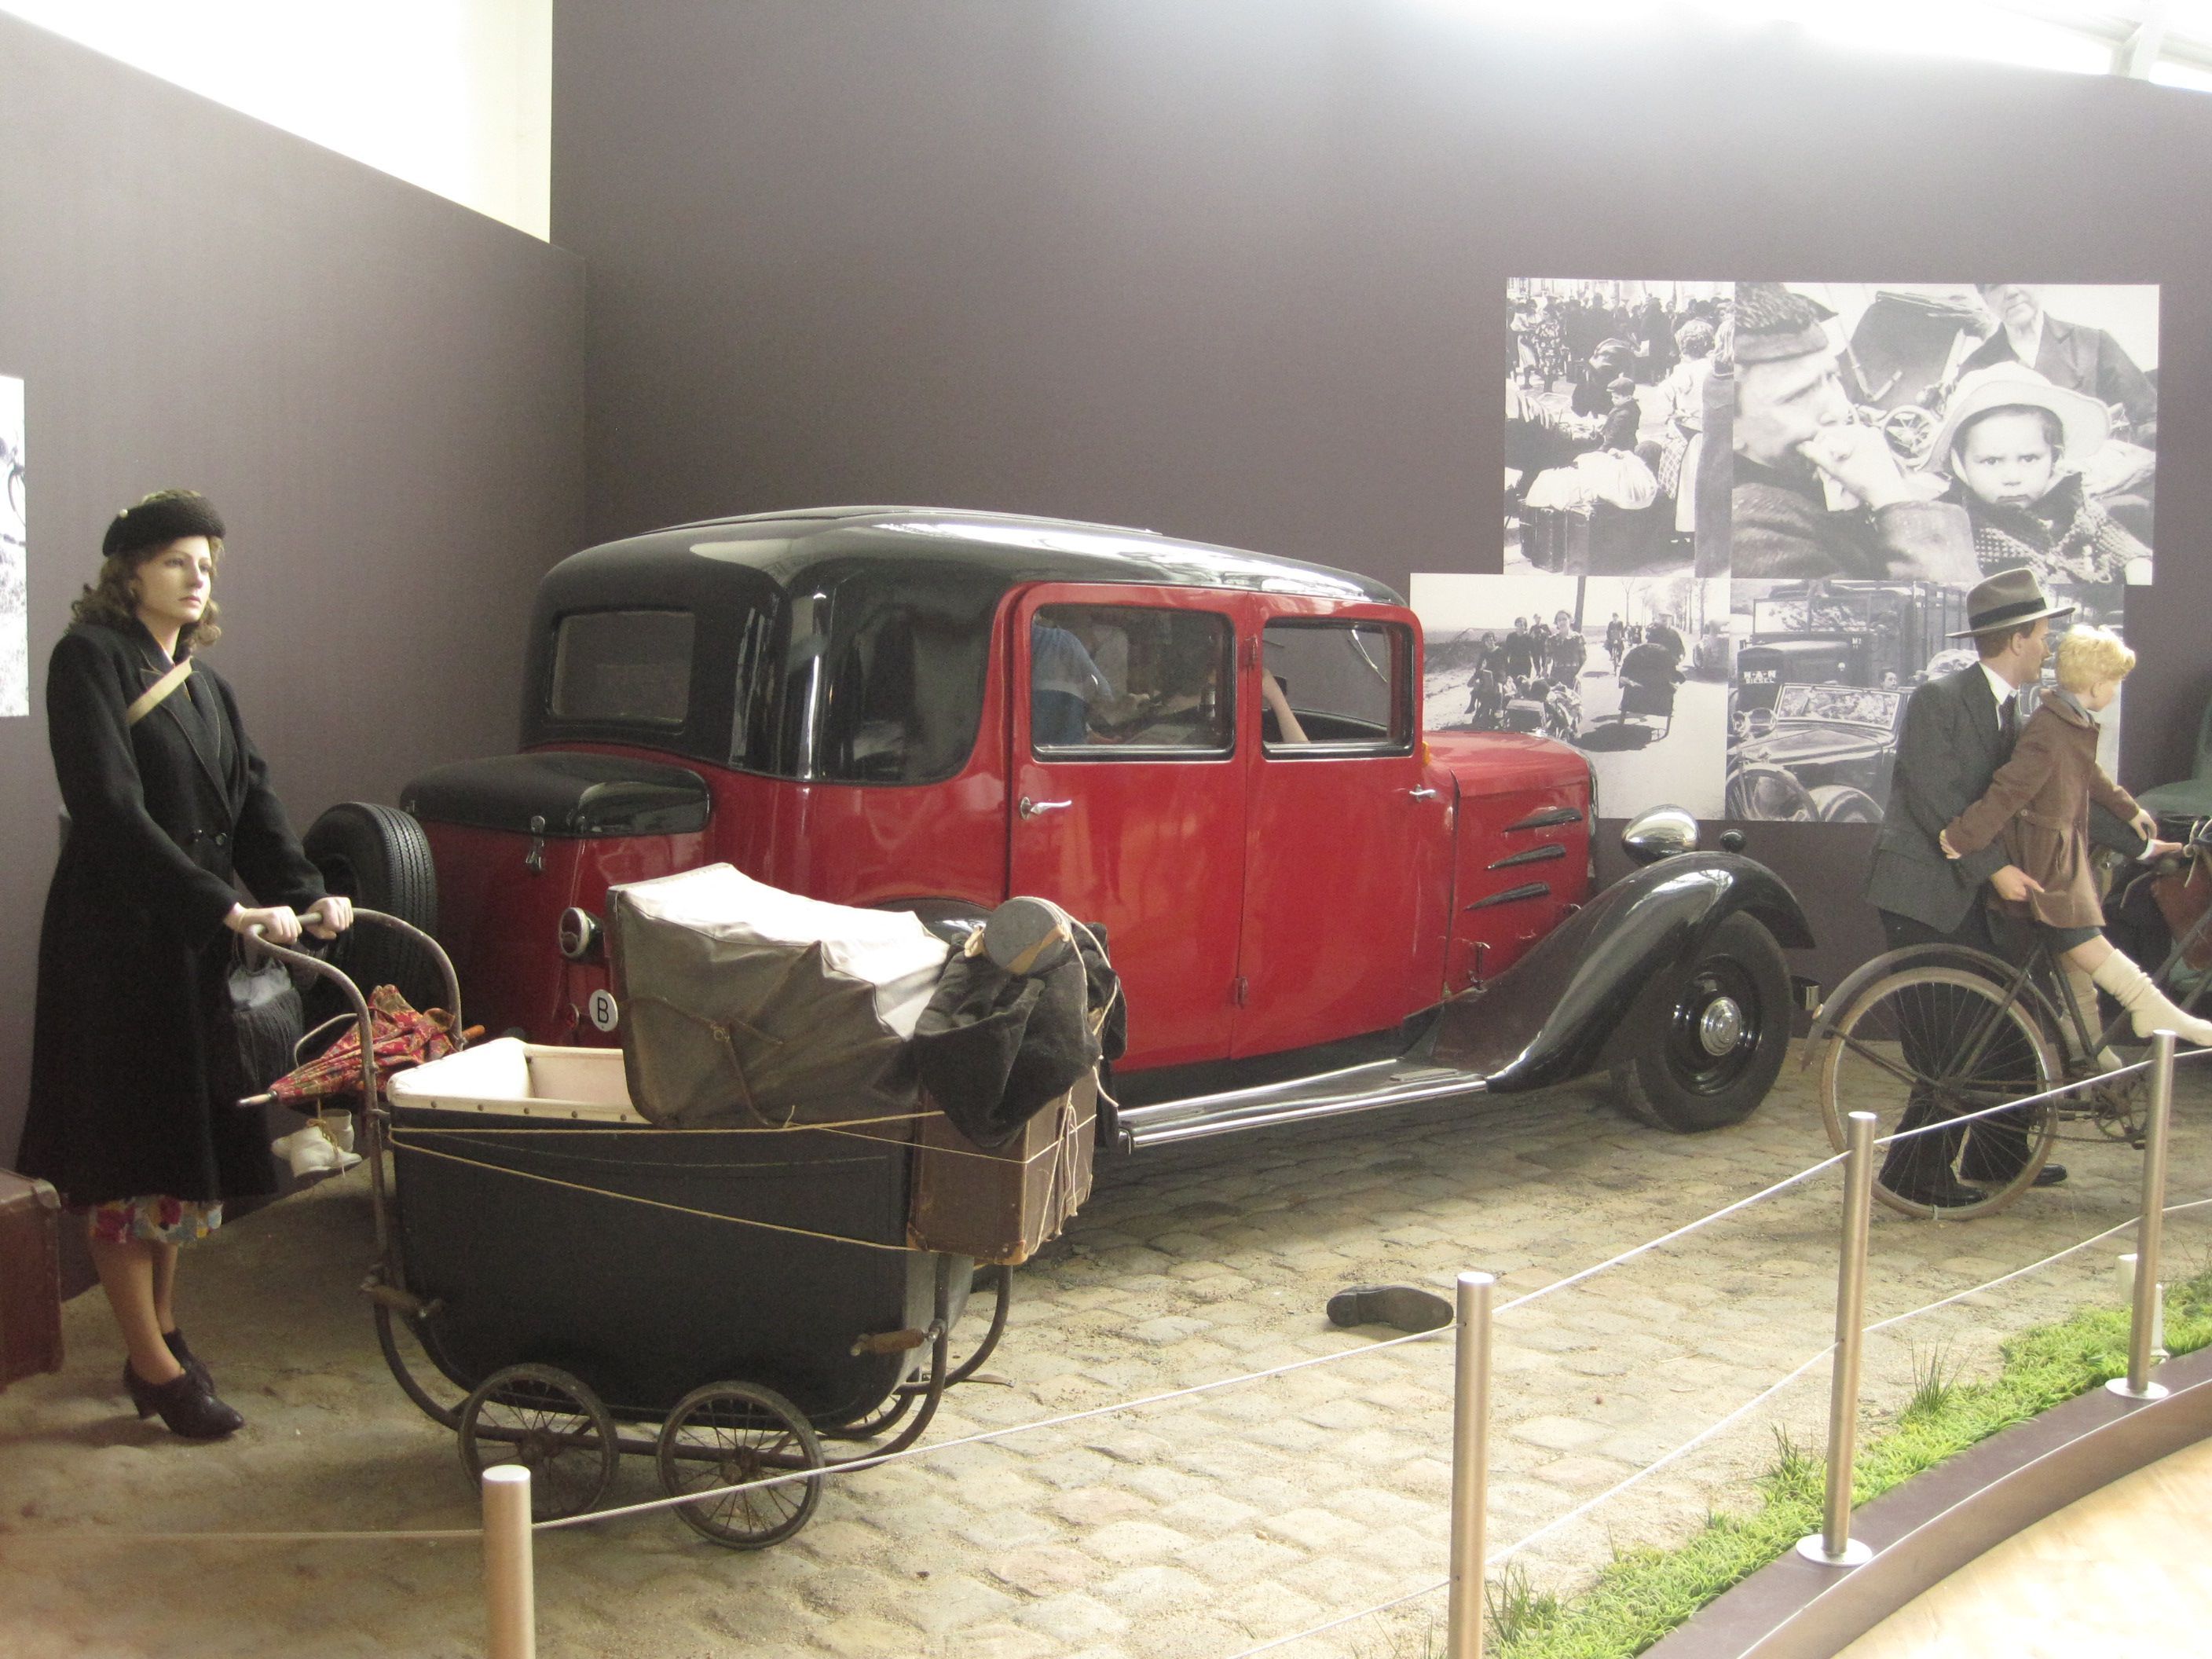 History is enacted here with the help of historical objects and mannequins. These are presented opposite historical photos, some of which show images similar to the street scenes enacted here, thereby authenticating them. Photo: Irmgard Zündorf, Military Historical Museum, Brussels 2015, License: [https://creativecommons.org/licenses/by-nc/3.0/de/ CC BY-NC 3.0 DE]